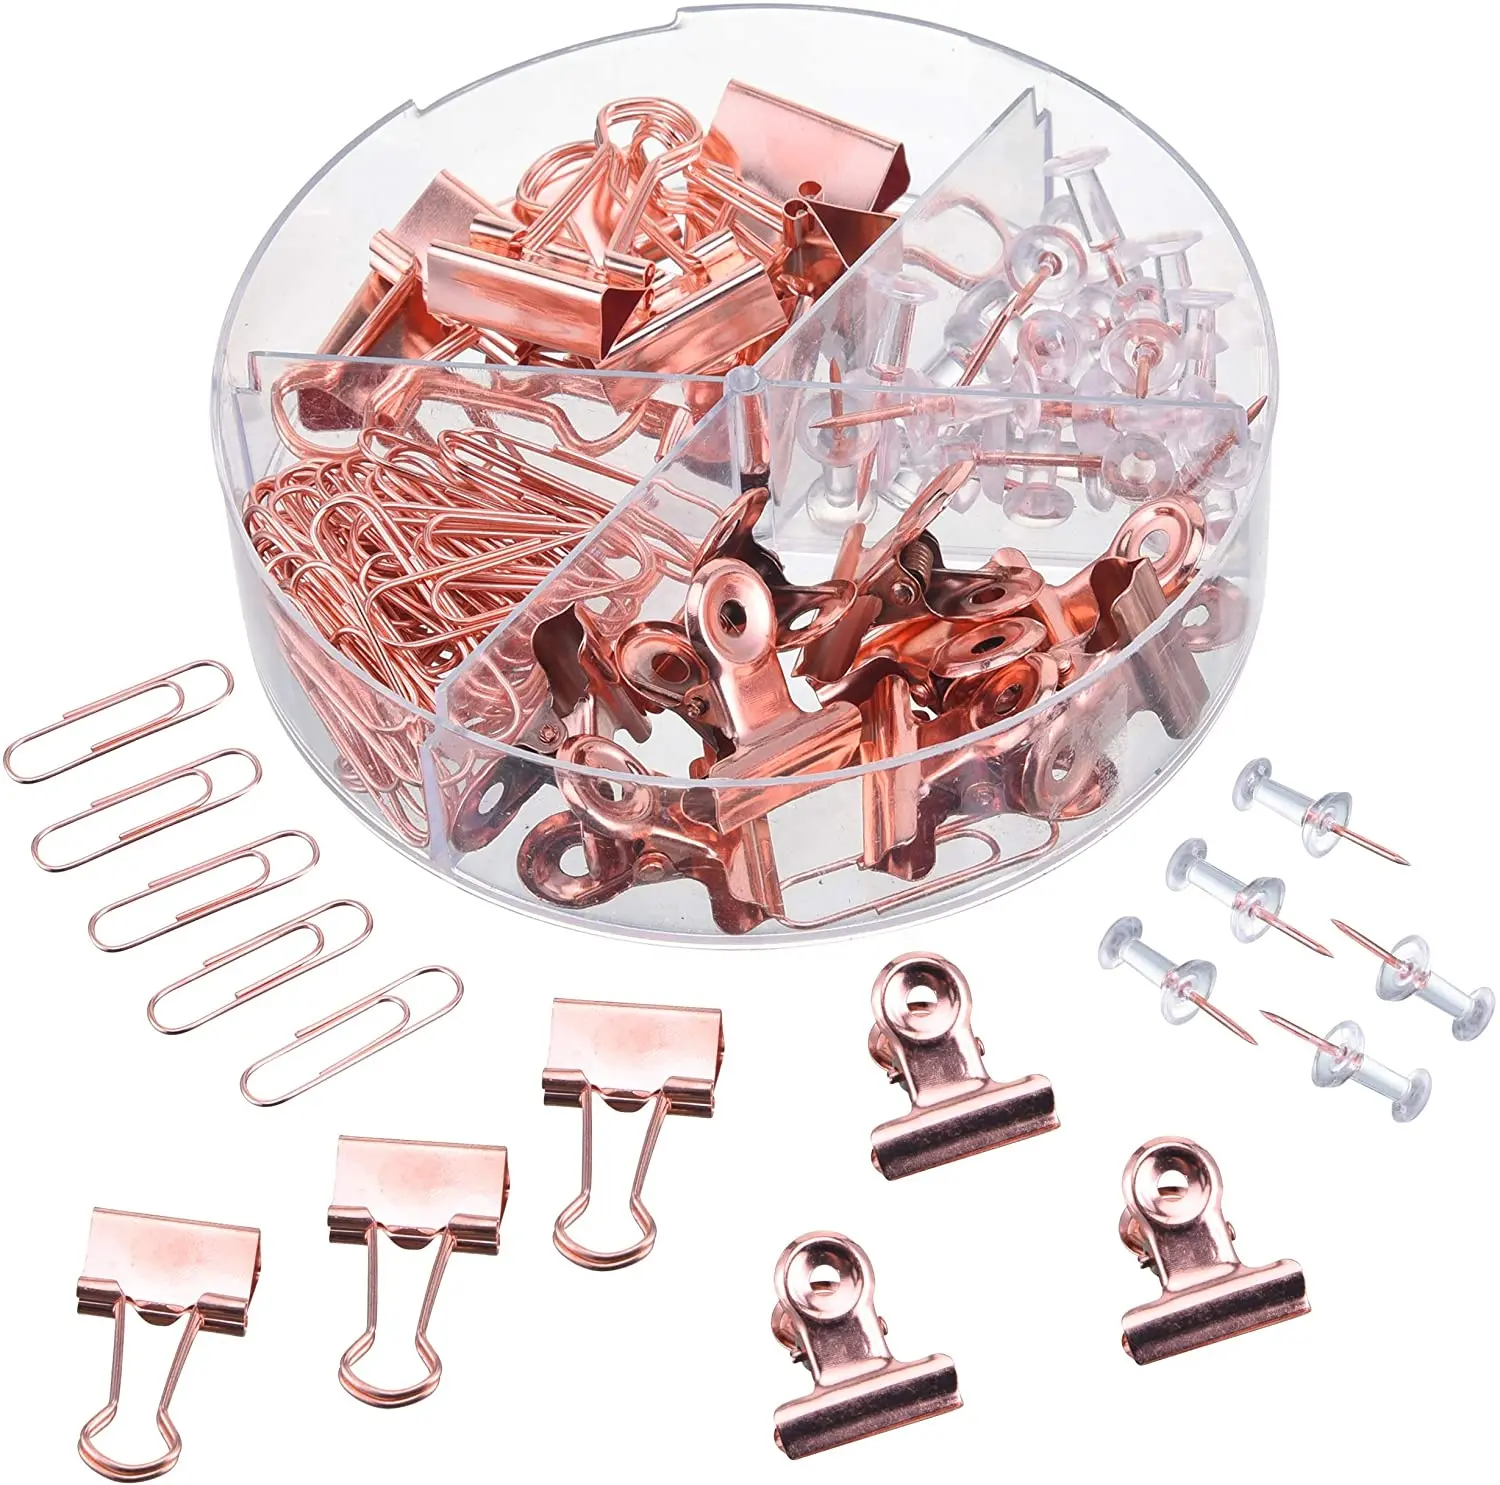 Push Pins Binder Clips Paperclips Bulldog Clips Sets with Box for Office School Accessories Home Desk Supplies